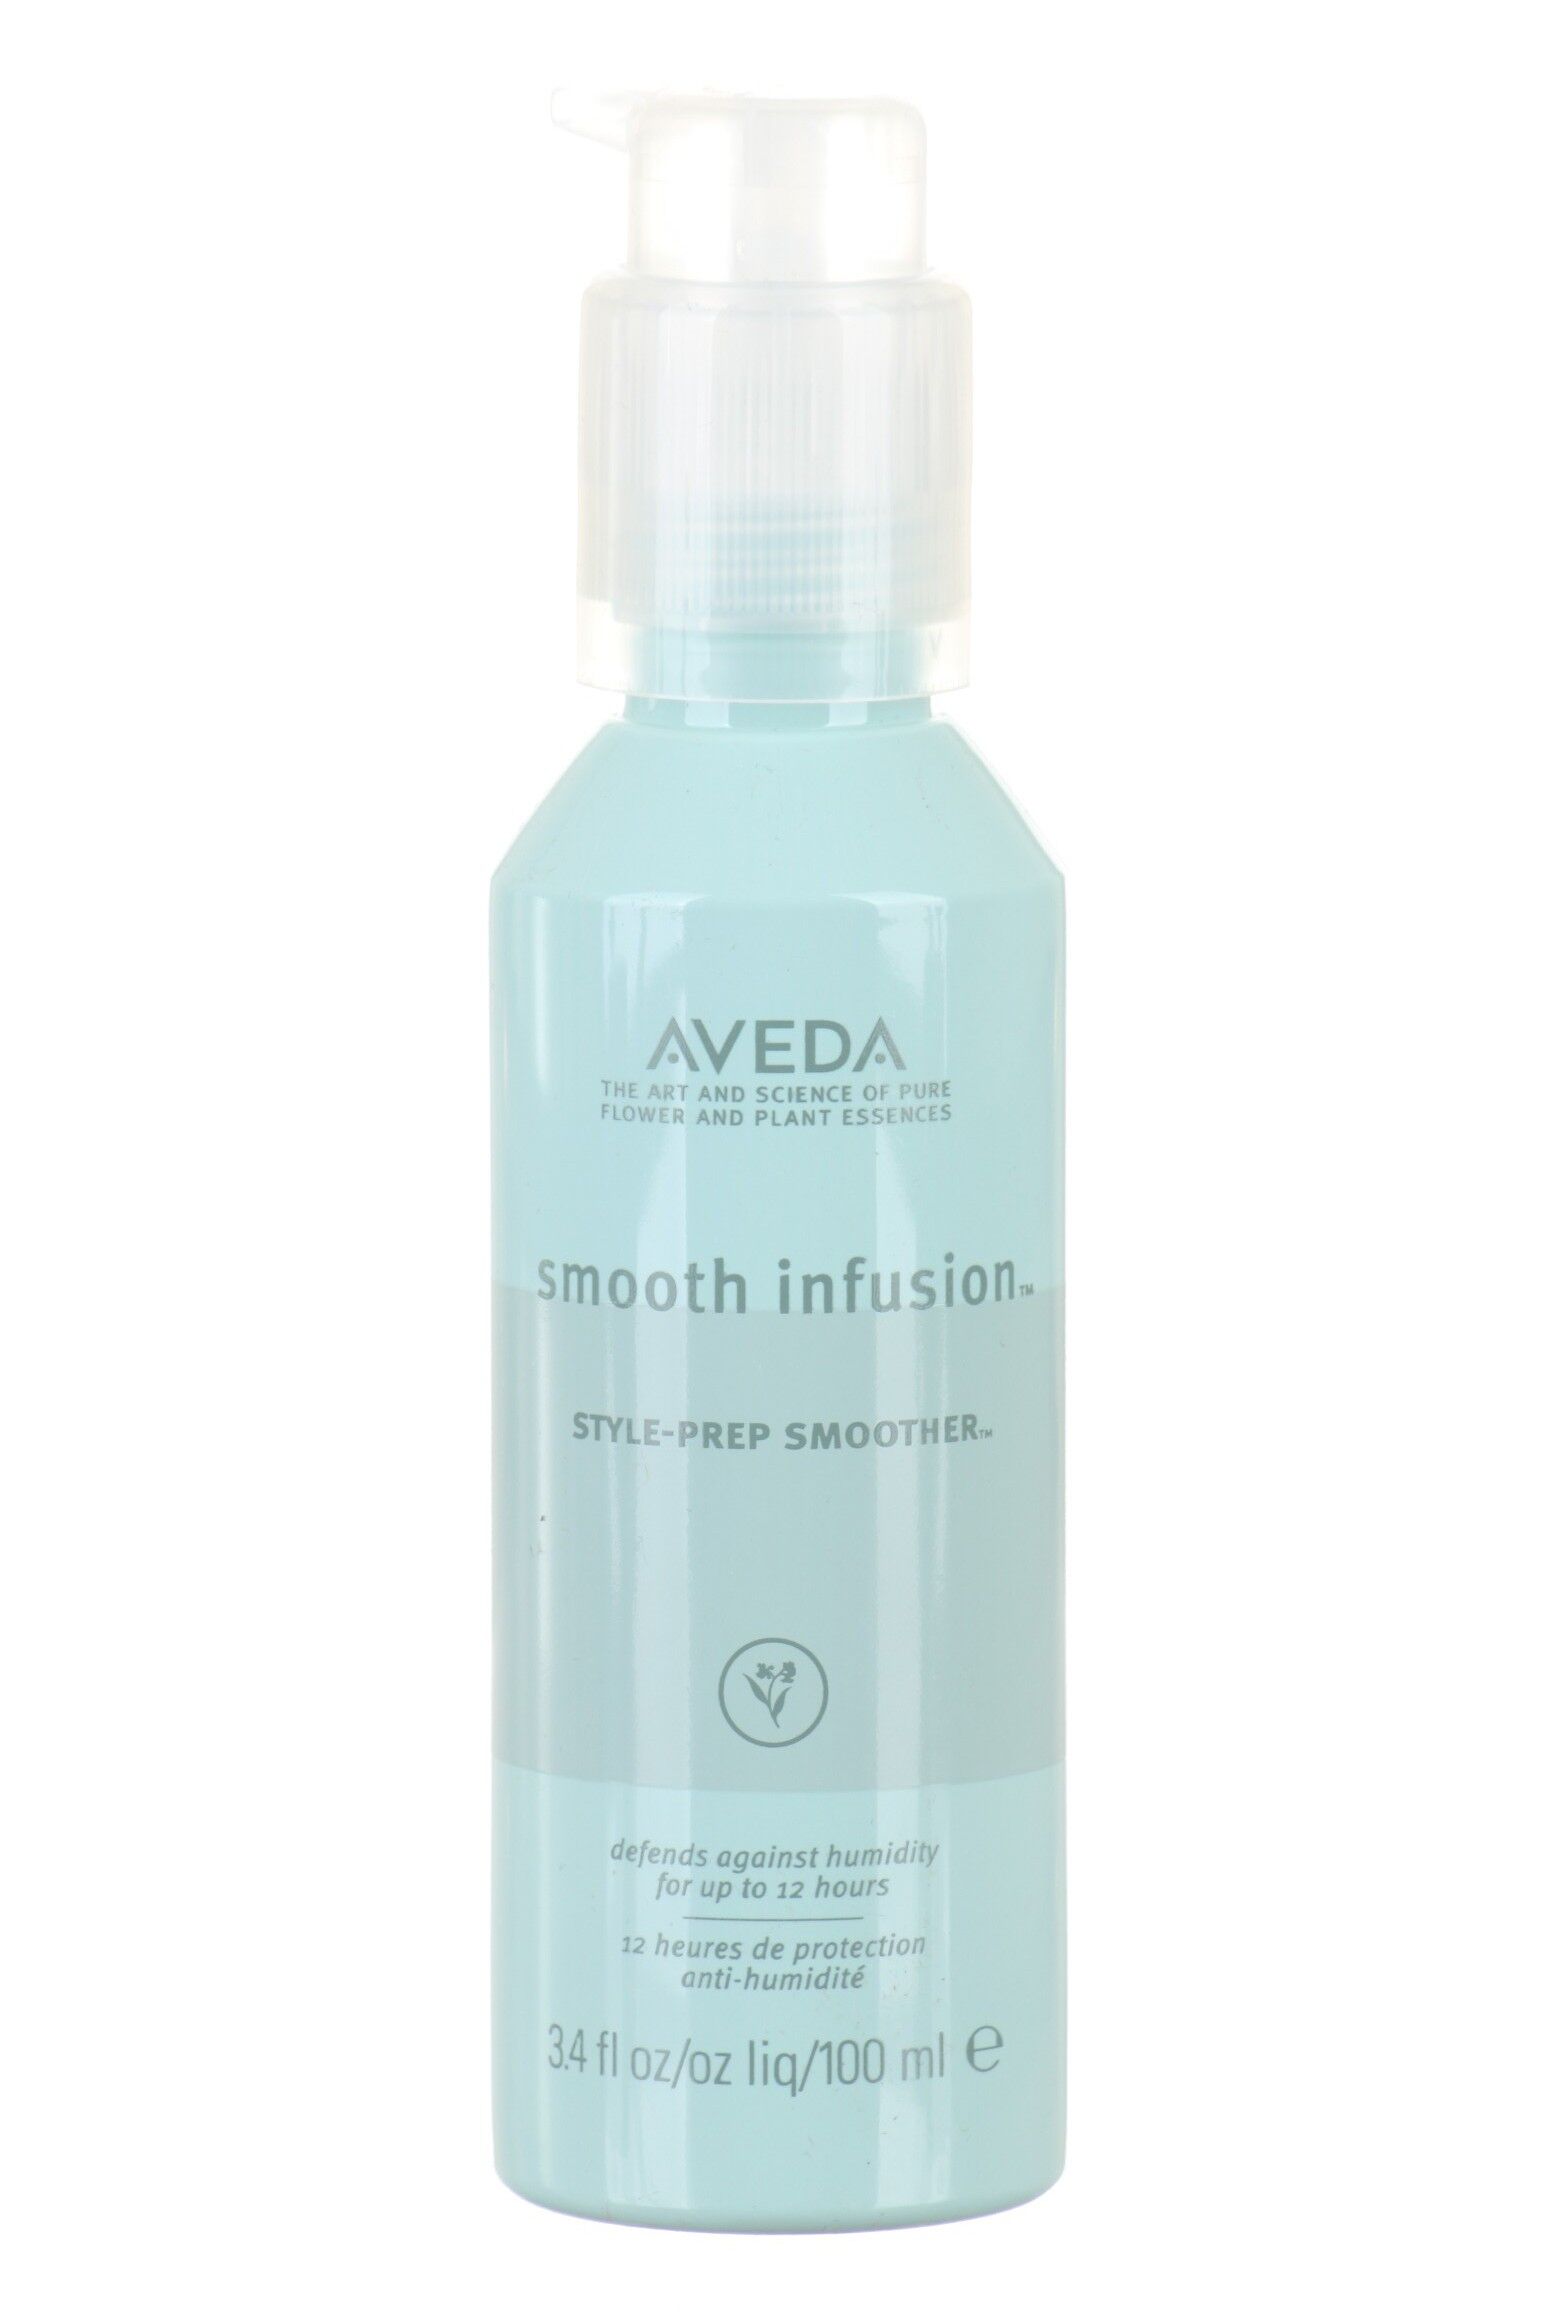 Aveda Smooth Infusion Stile-Prep Smoother 100 ml